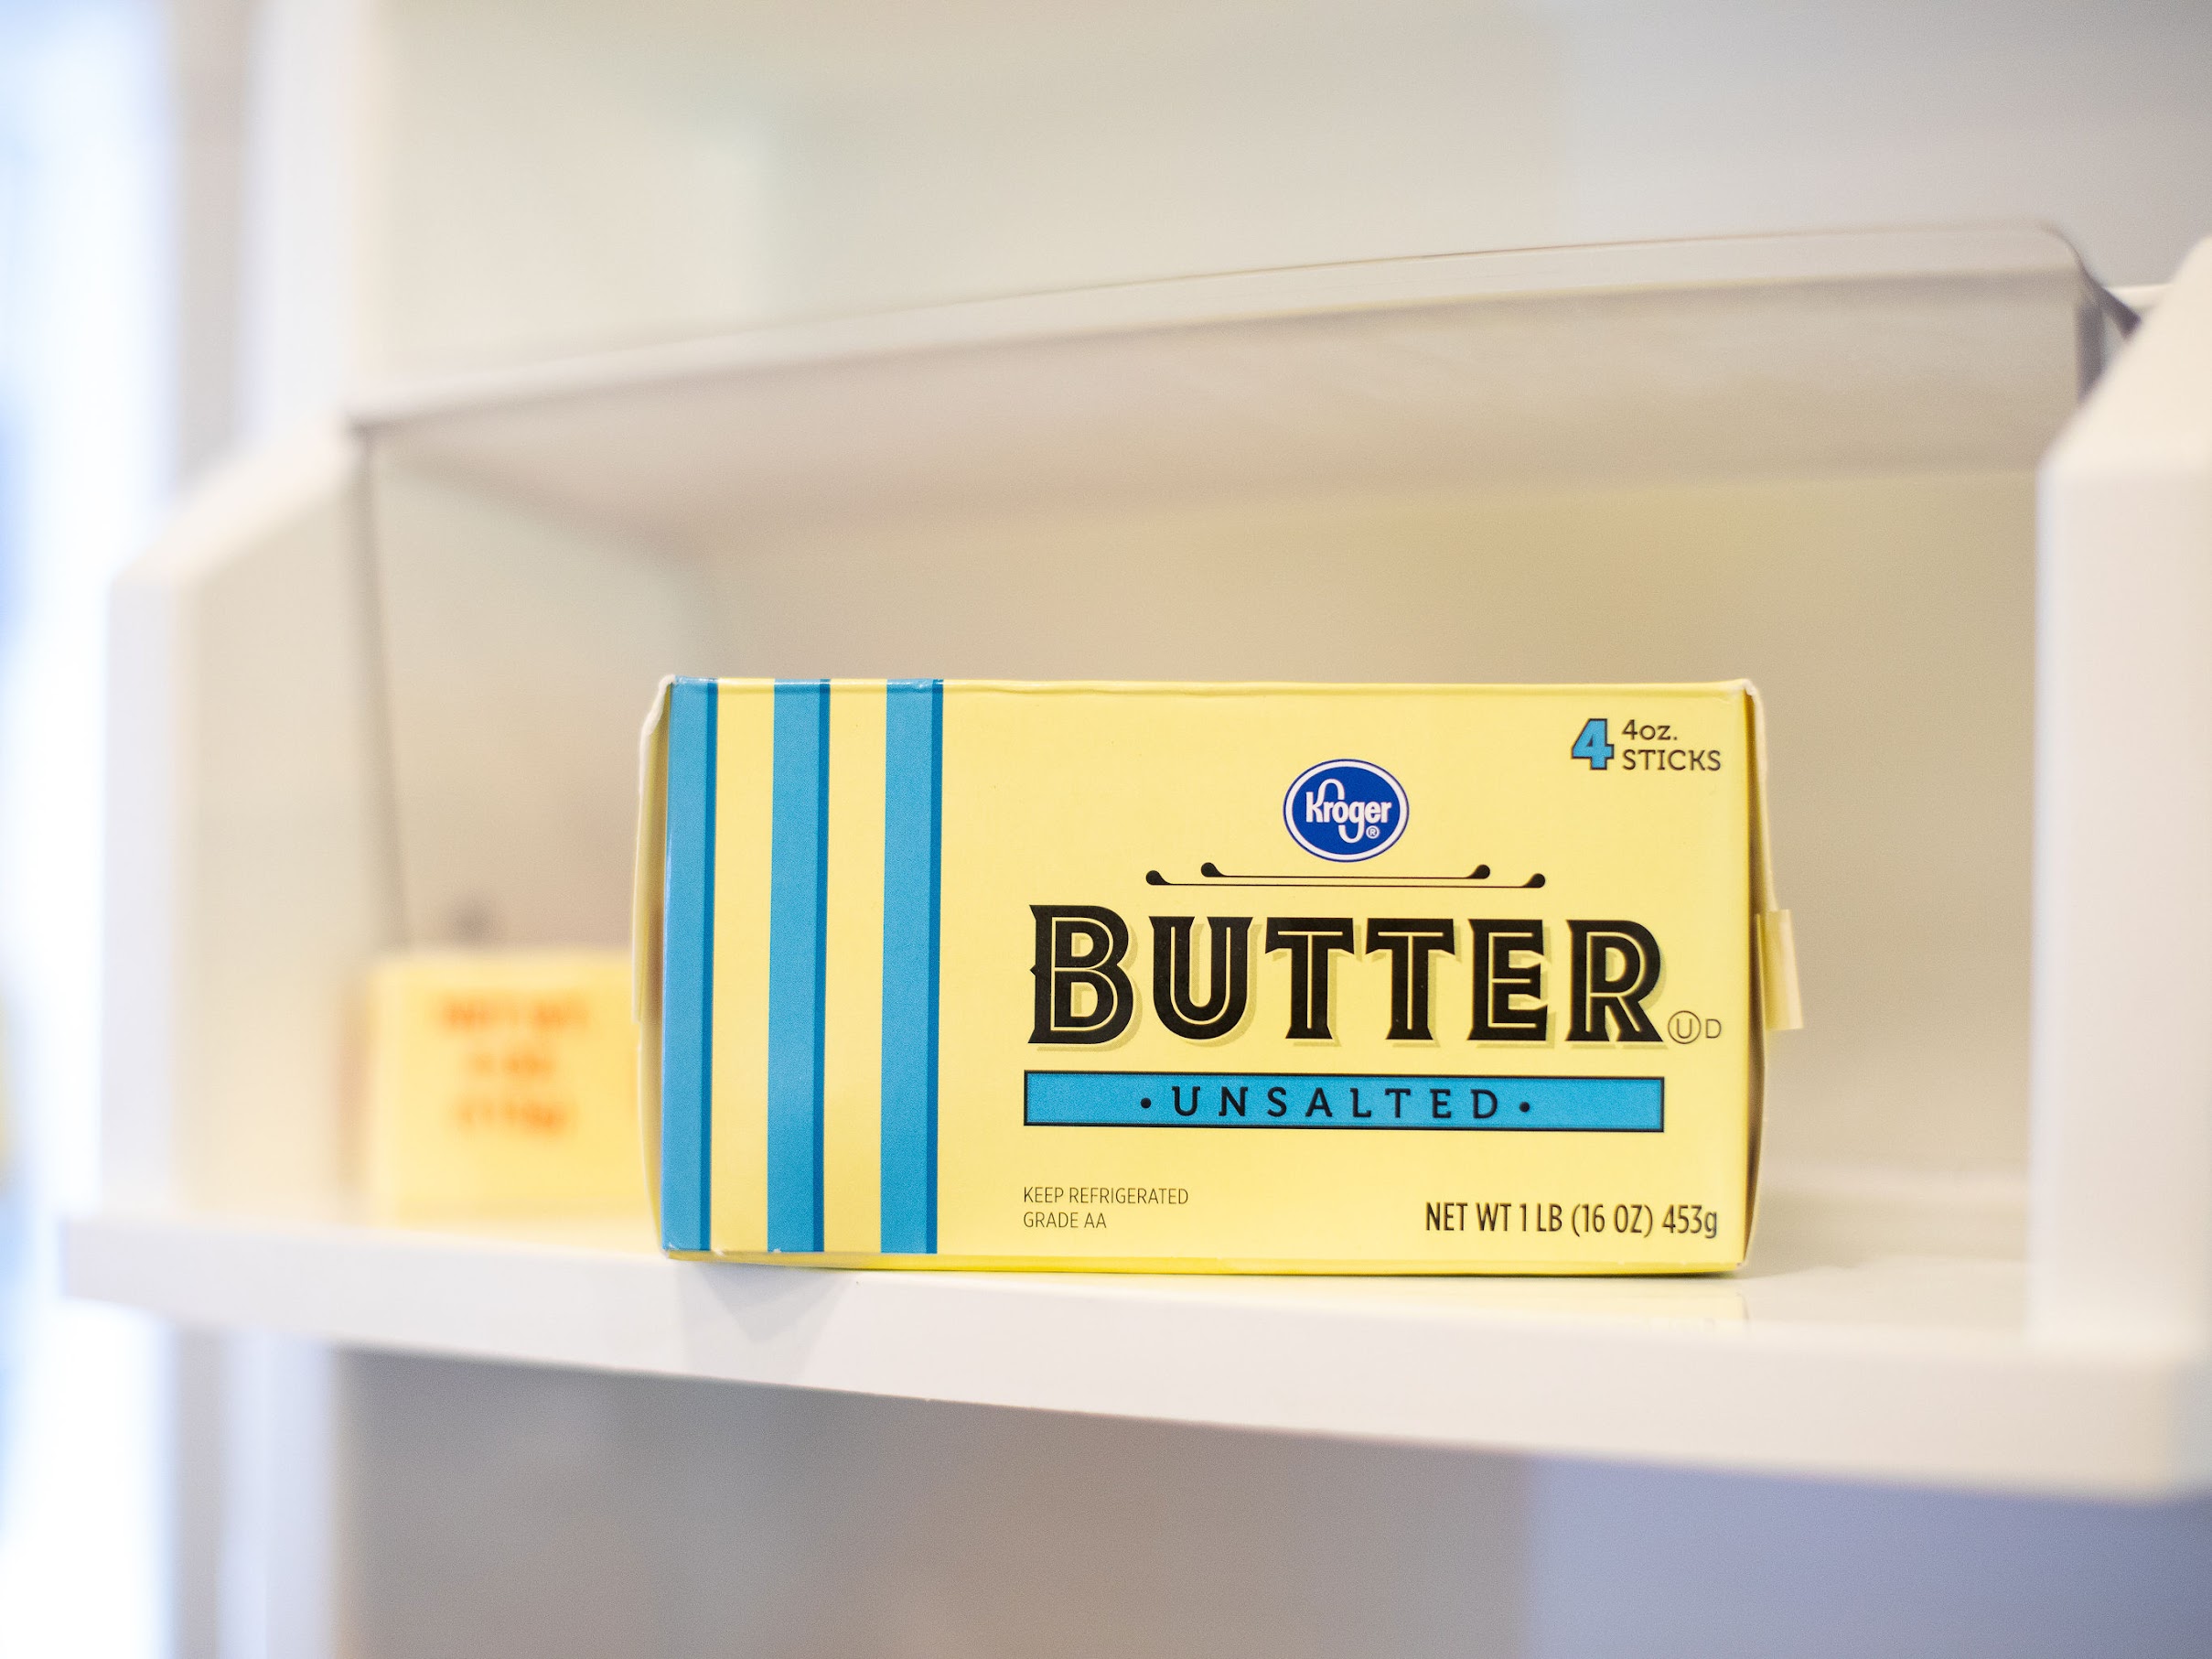 Stock Up On One-Pound Boxes Of Kroger Butter For Just $2.47